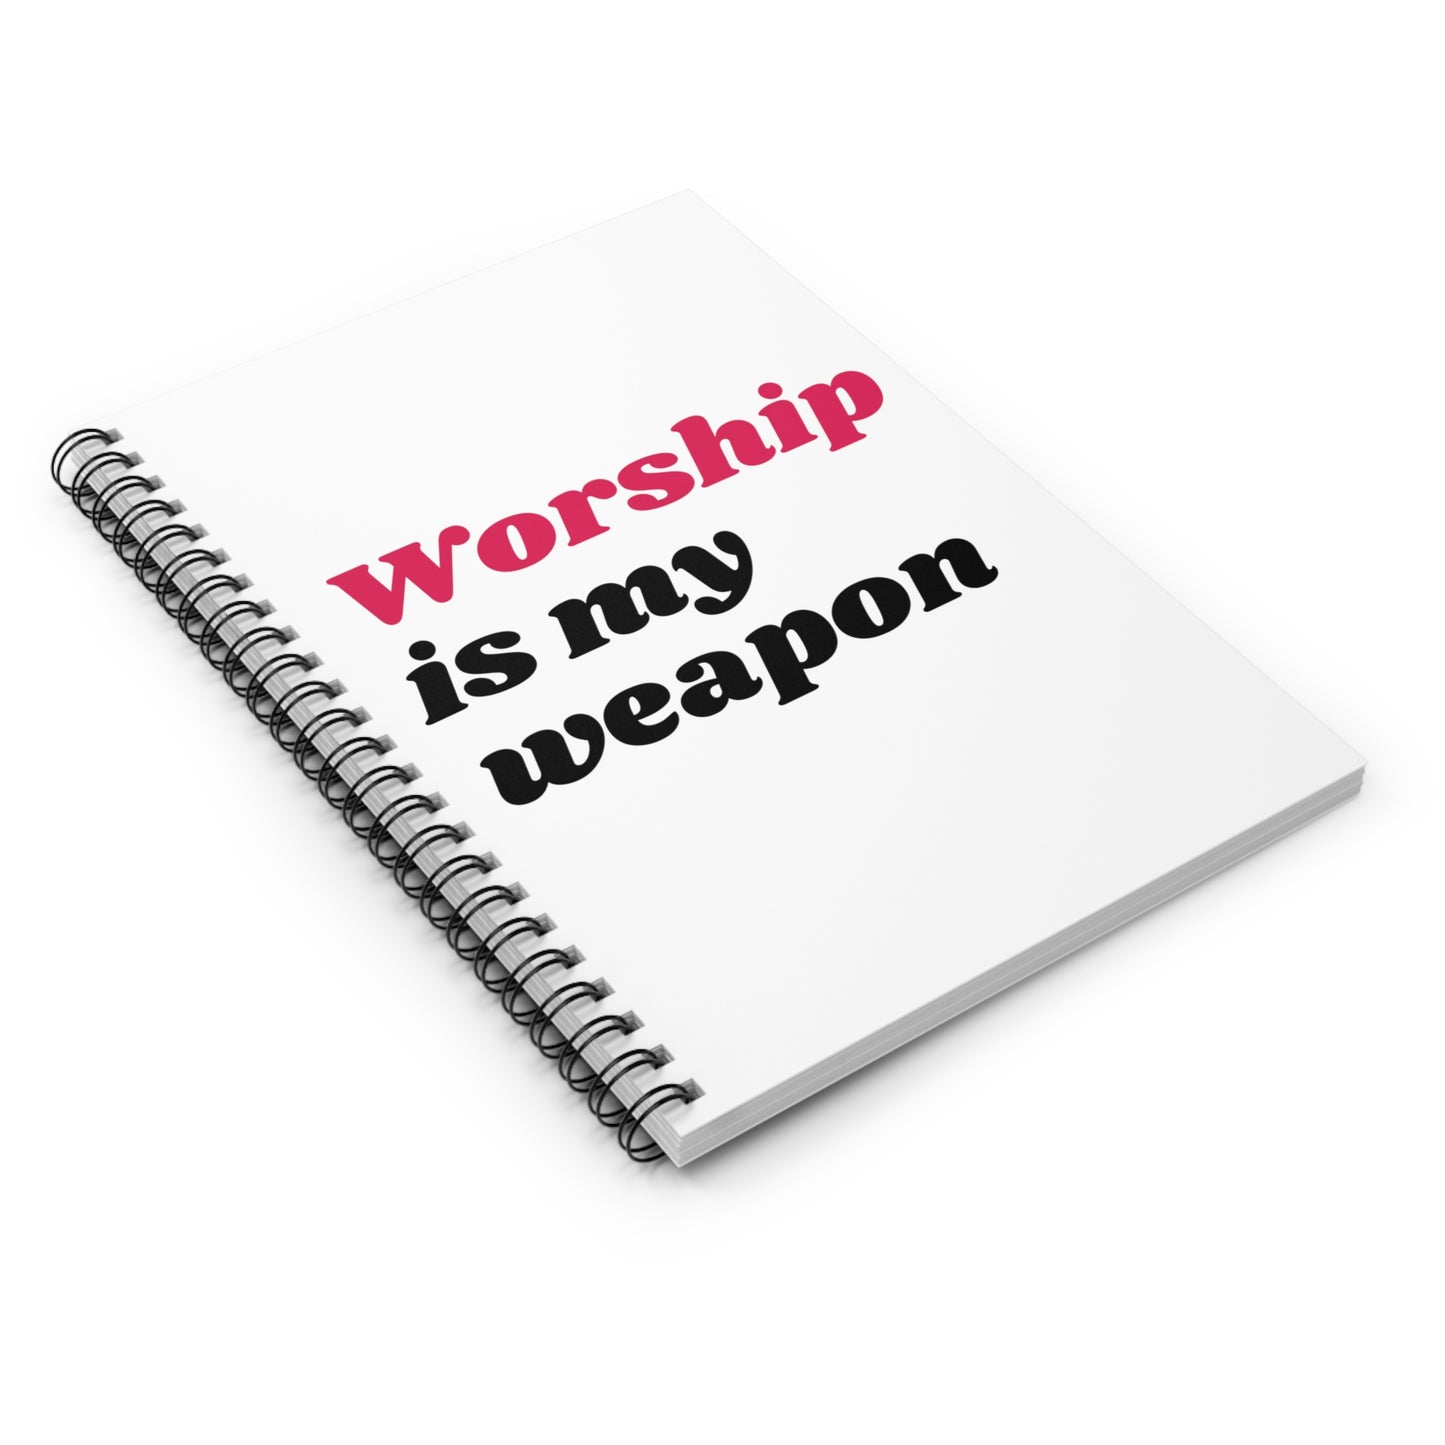 Worship is my Weapon Spiral Notebook - Ruled Line